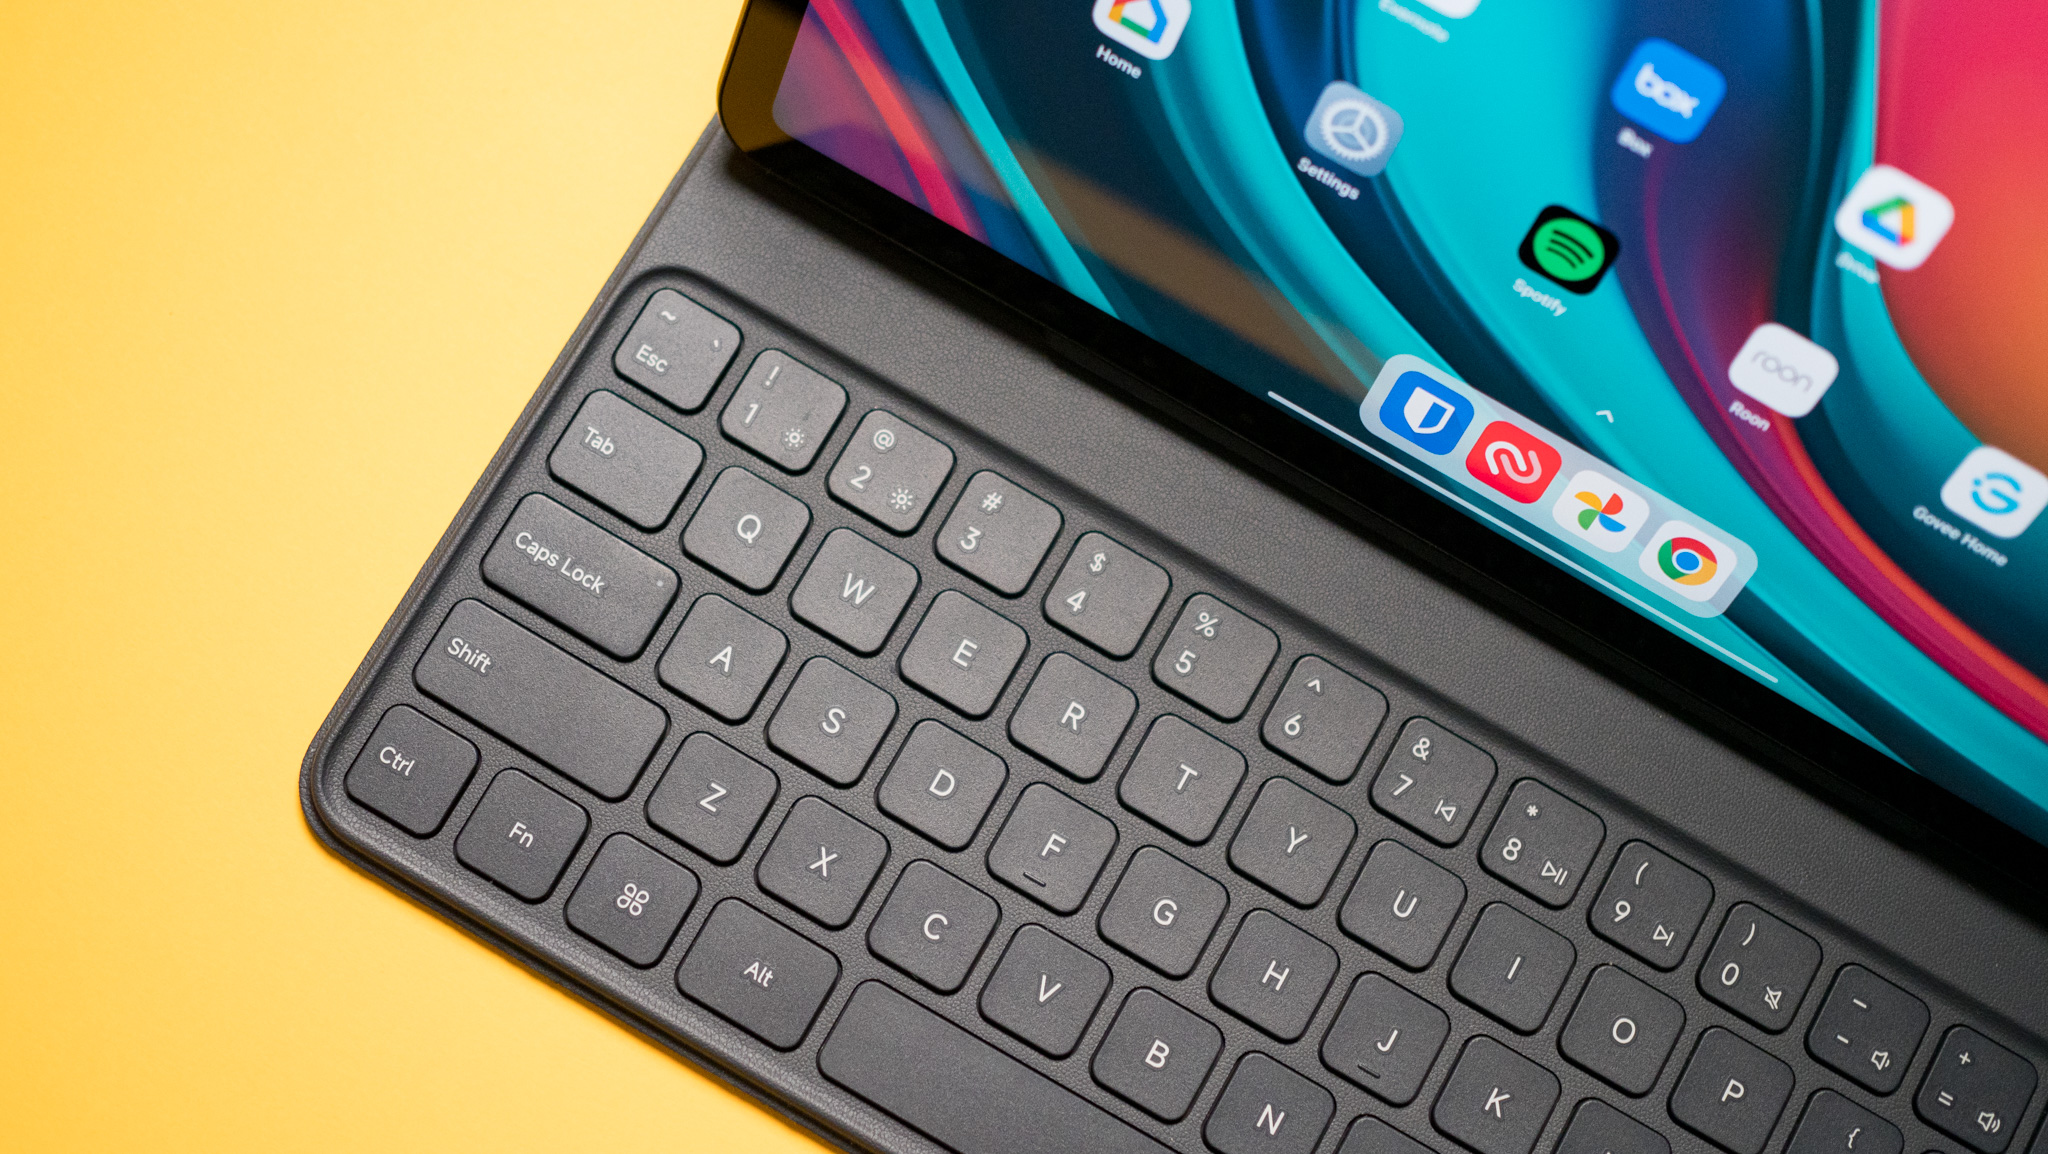 Redmi Pad Pro's keyboard case docked to the tablet